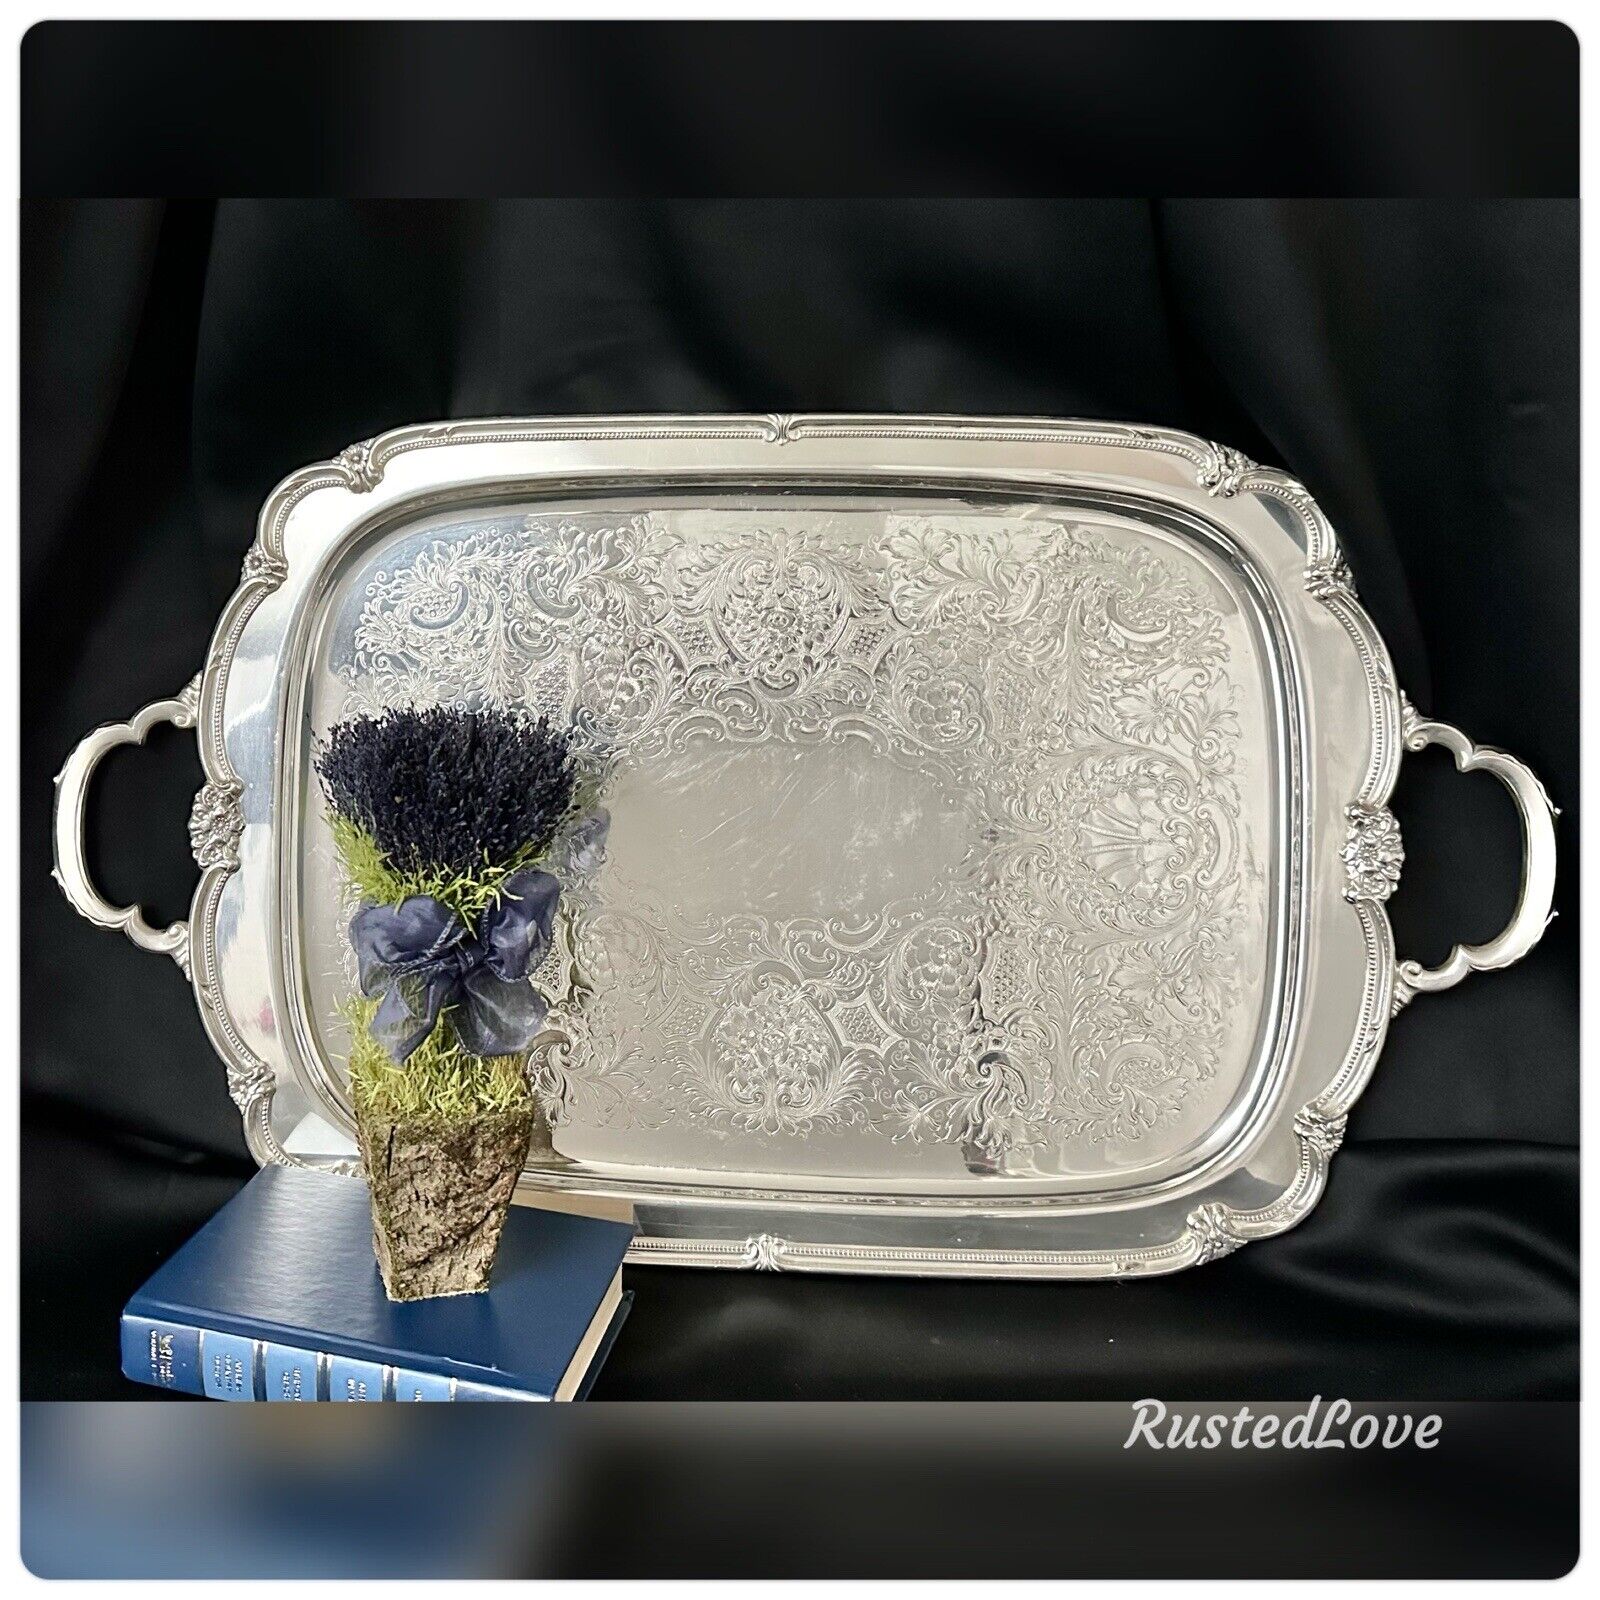 *Remembrance Butlers Tray International Silver Silver Plated Handled Tea Tray Lg